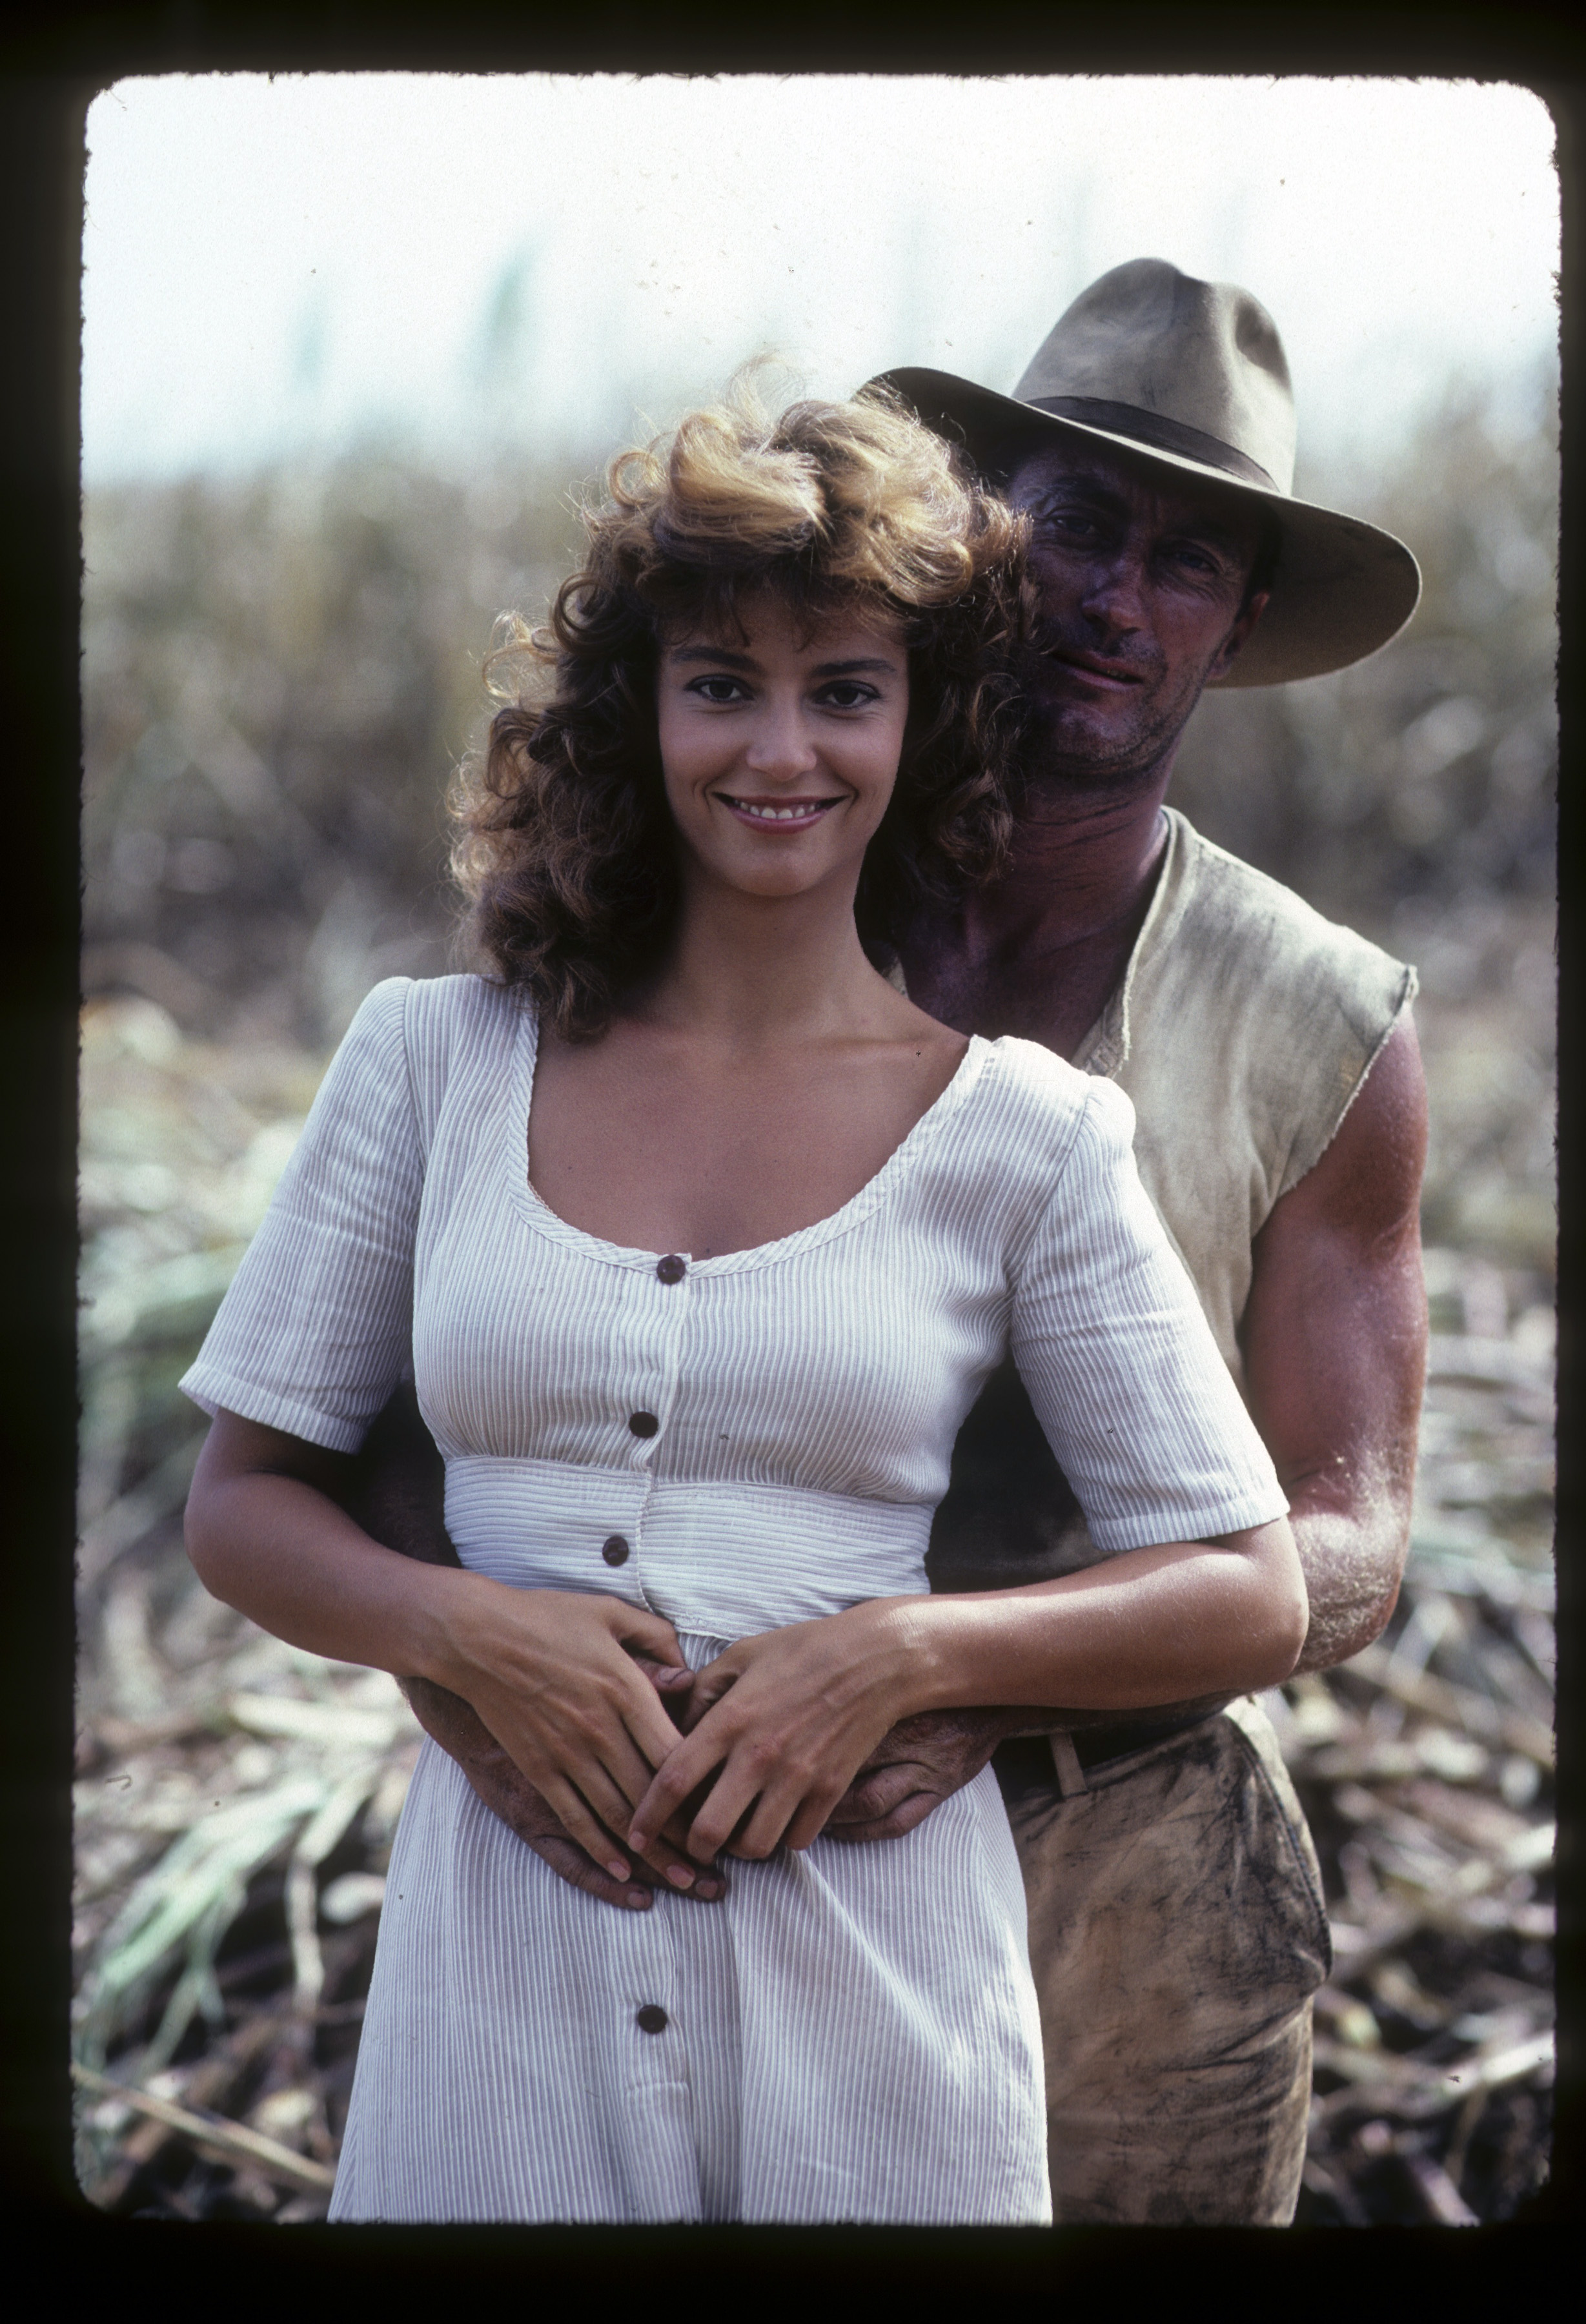 Bryan Brown and Rachel Ward in "The Thorn Birds" in 1983 | Source: Getty Images